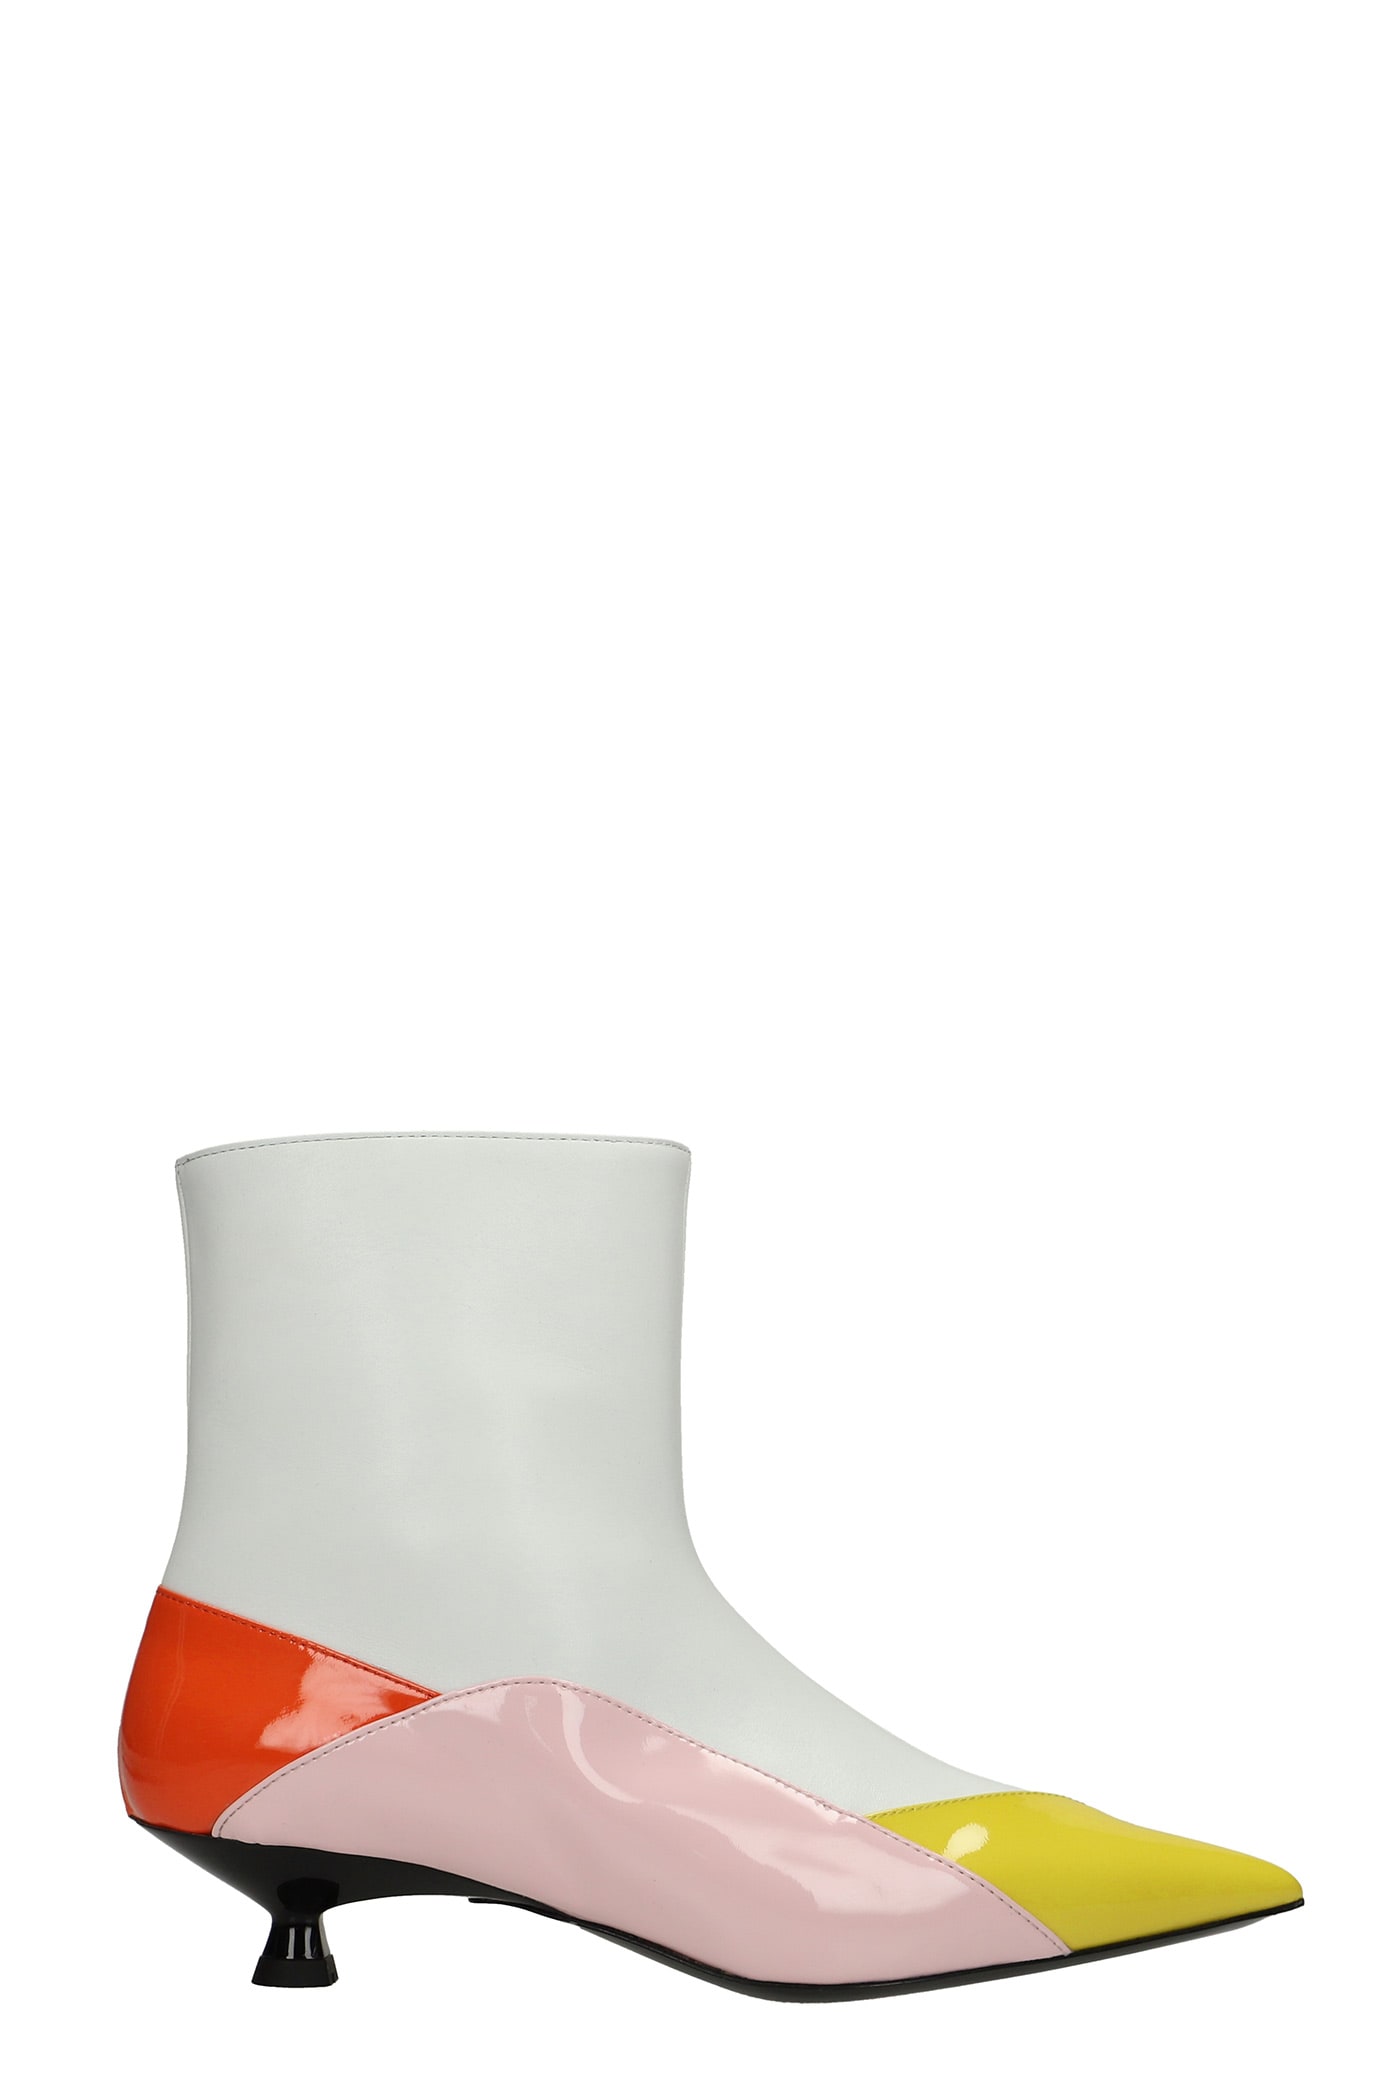 MSGM Low Heels Ankle Boots In White Leather